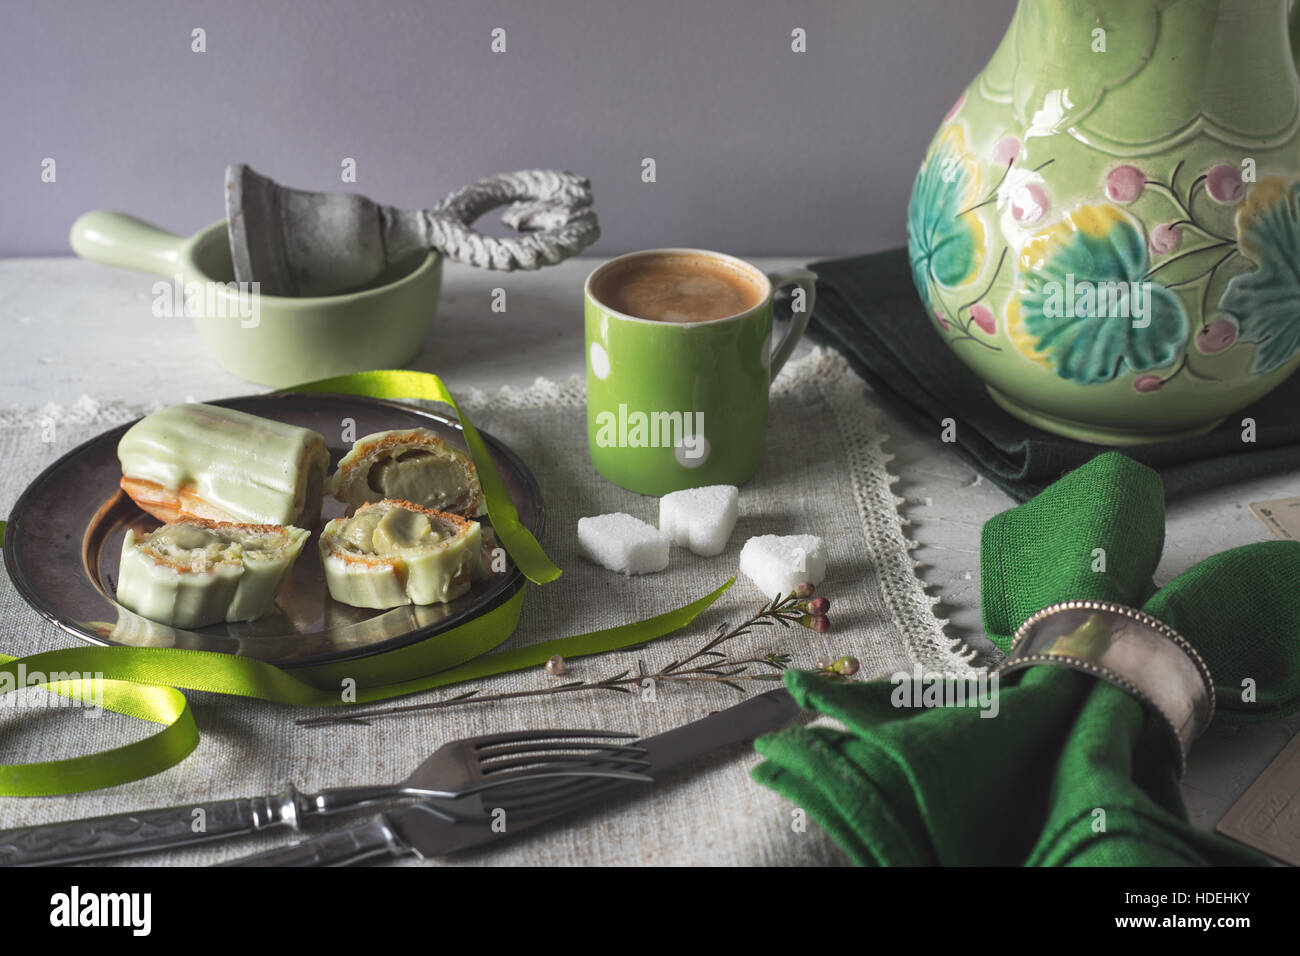 Eclair with green decorations on the table horizontal Stock Photo